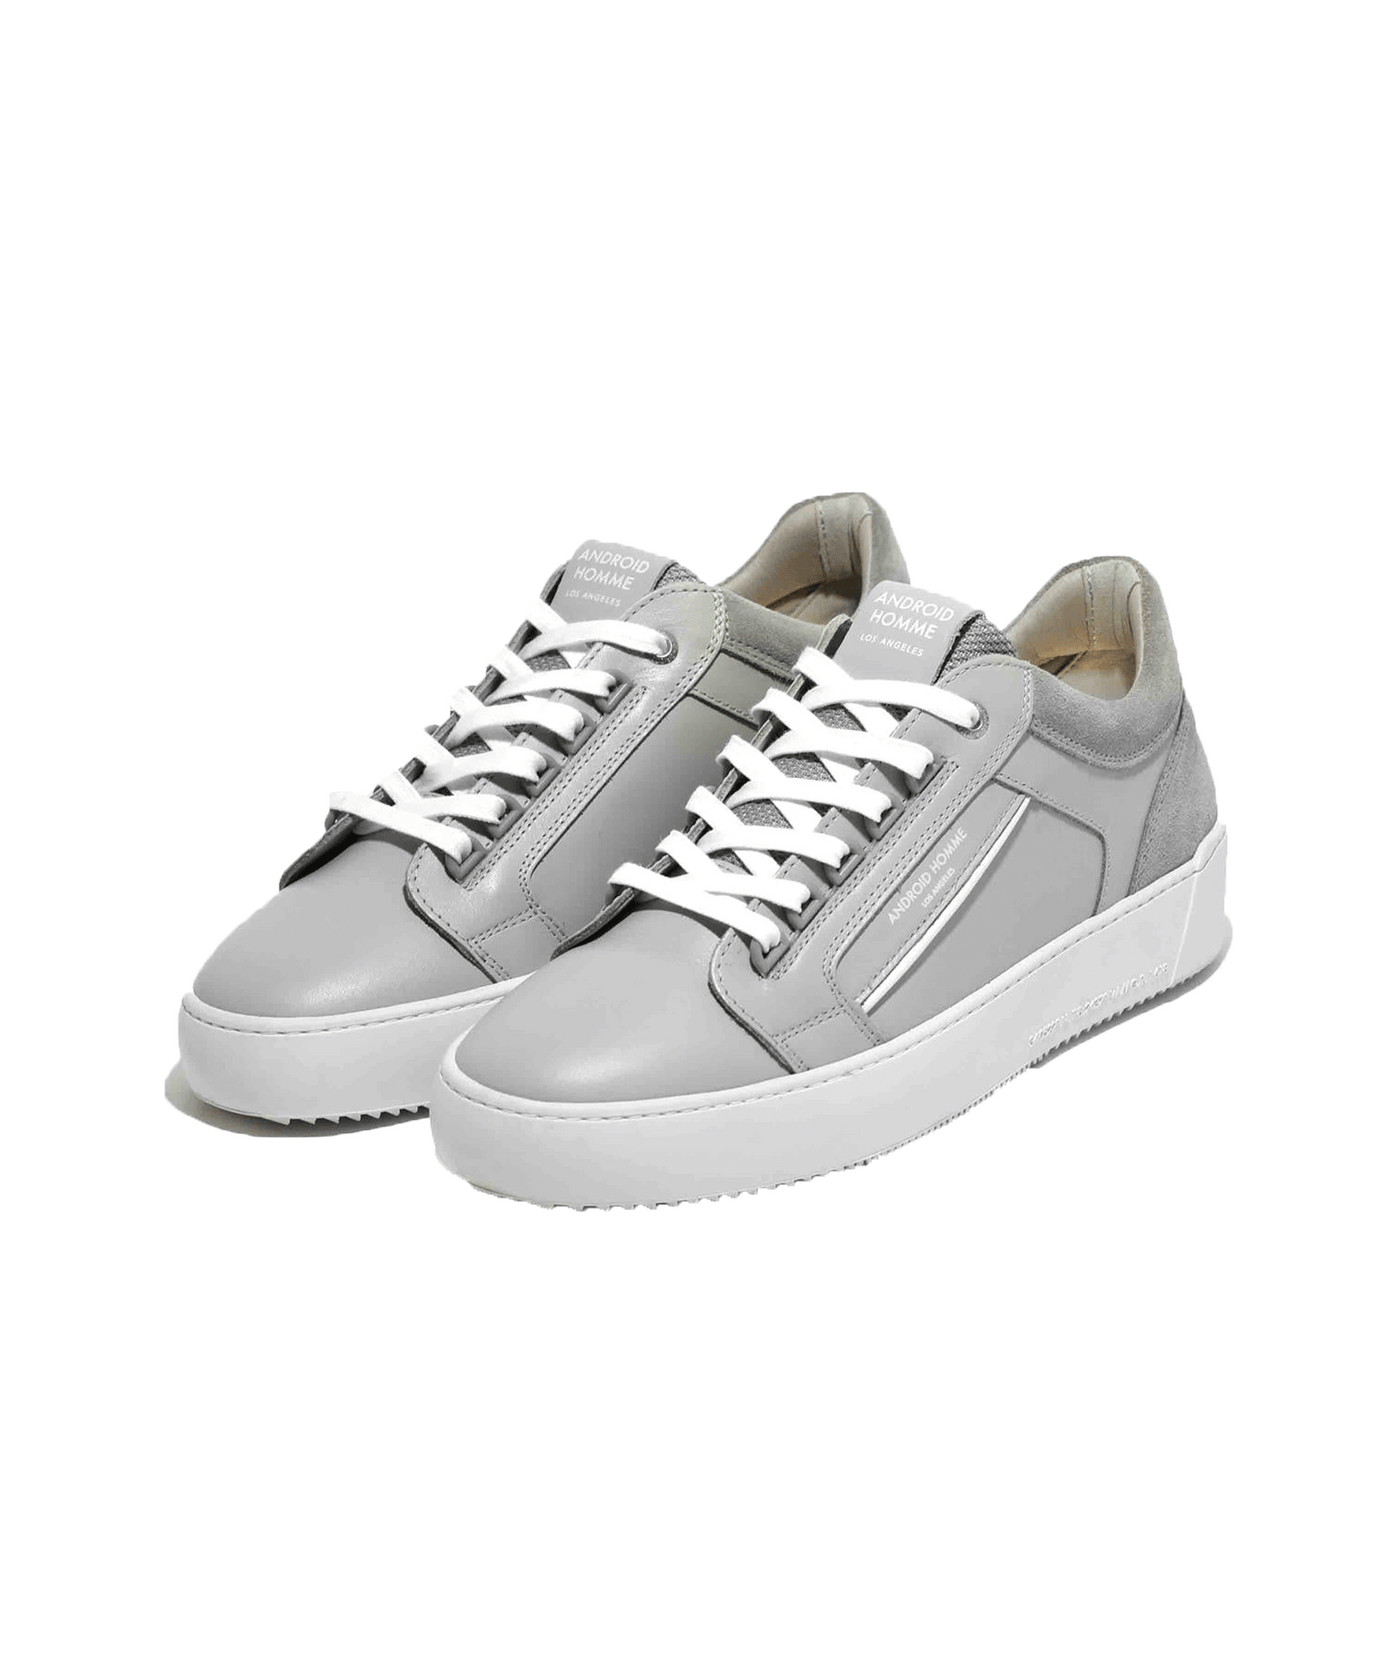 Android Homme - Ahp221-25 - Venice - Grey/white Leather 3